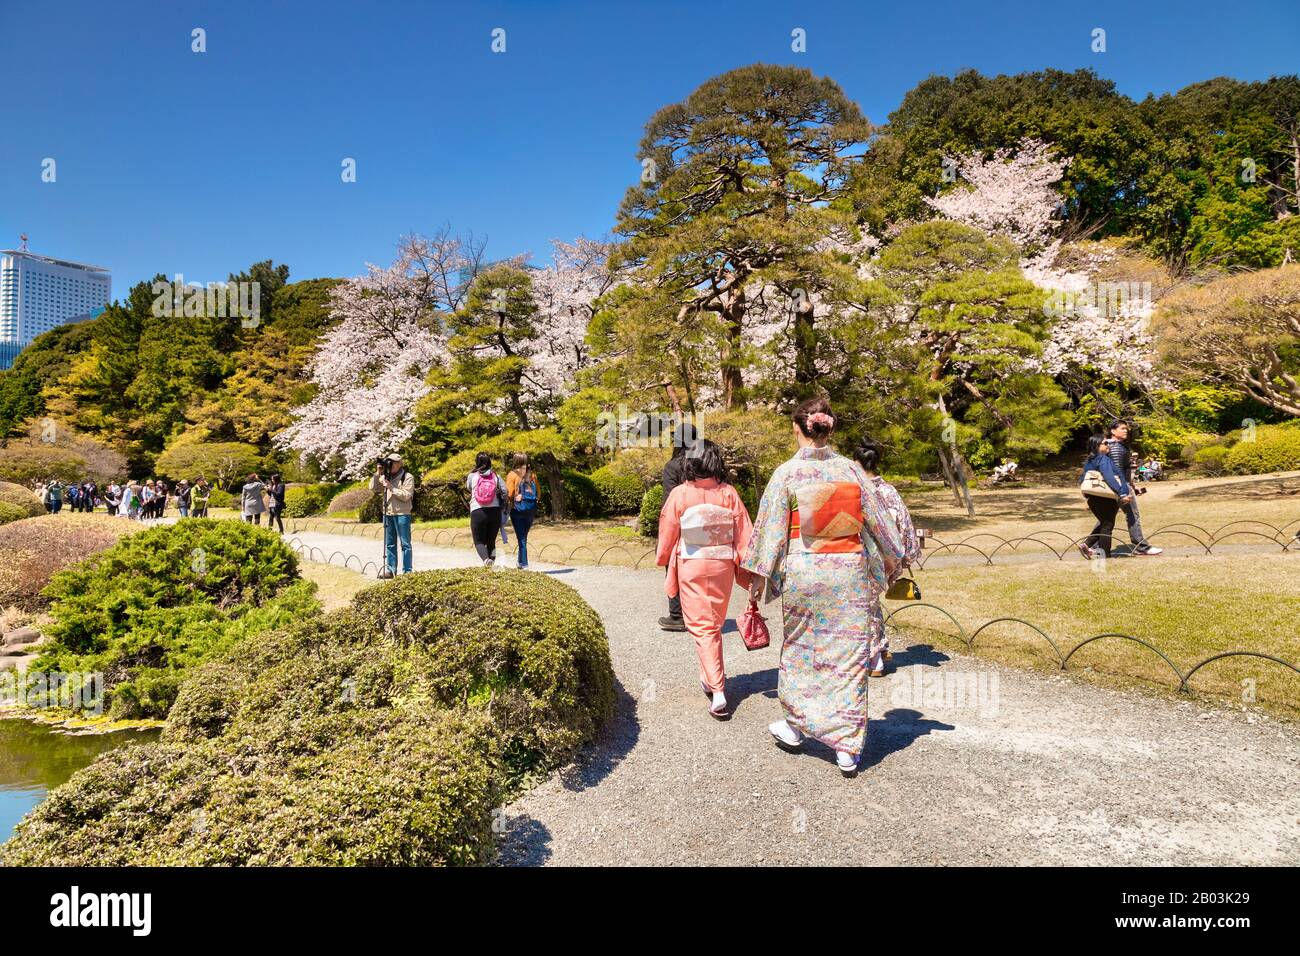 4 April 2019: Tokyo, Japan - Kimono wearing tourists in Shinjuku Gyoen Park, one of the most famous parks in Japan, in Cherry Blossom season. Stock Photo